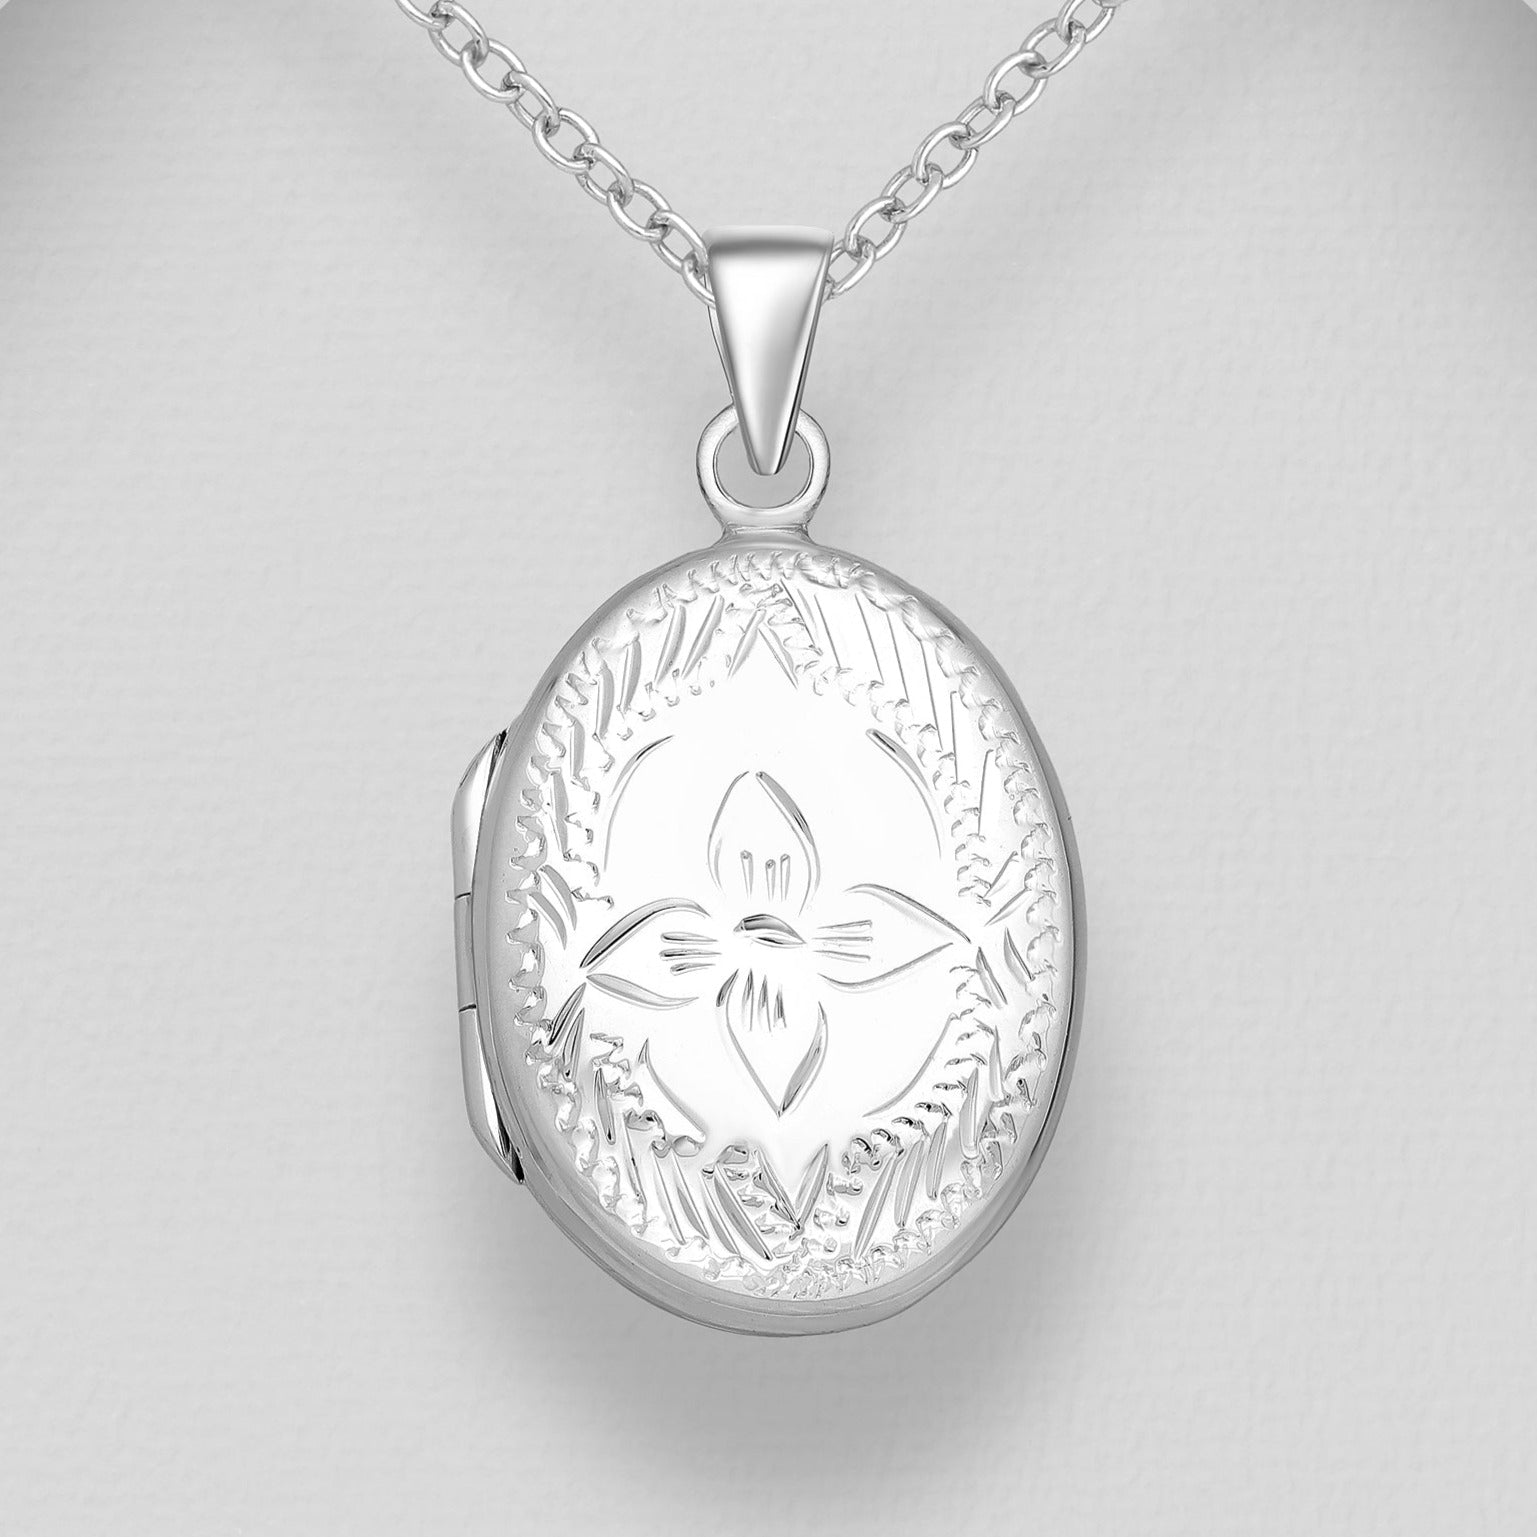 Oval Picture Locket Necklace, sterling  silver on a silver chain